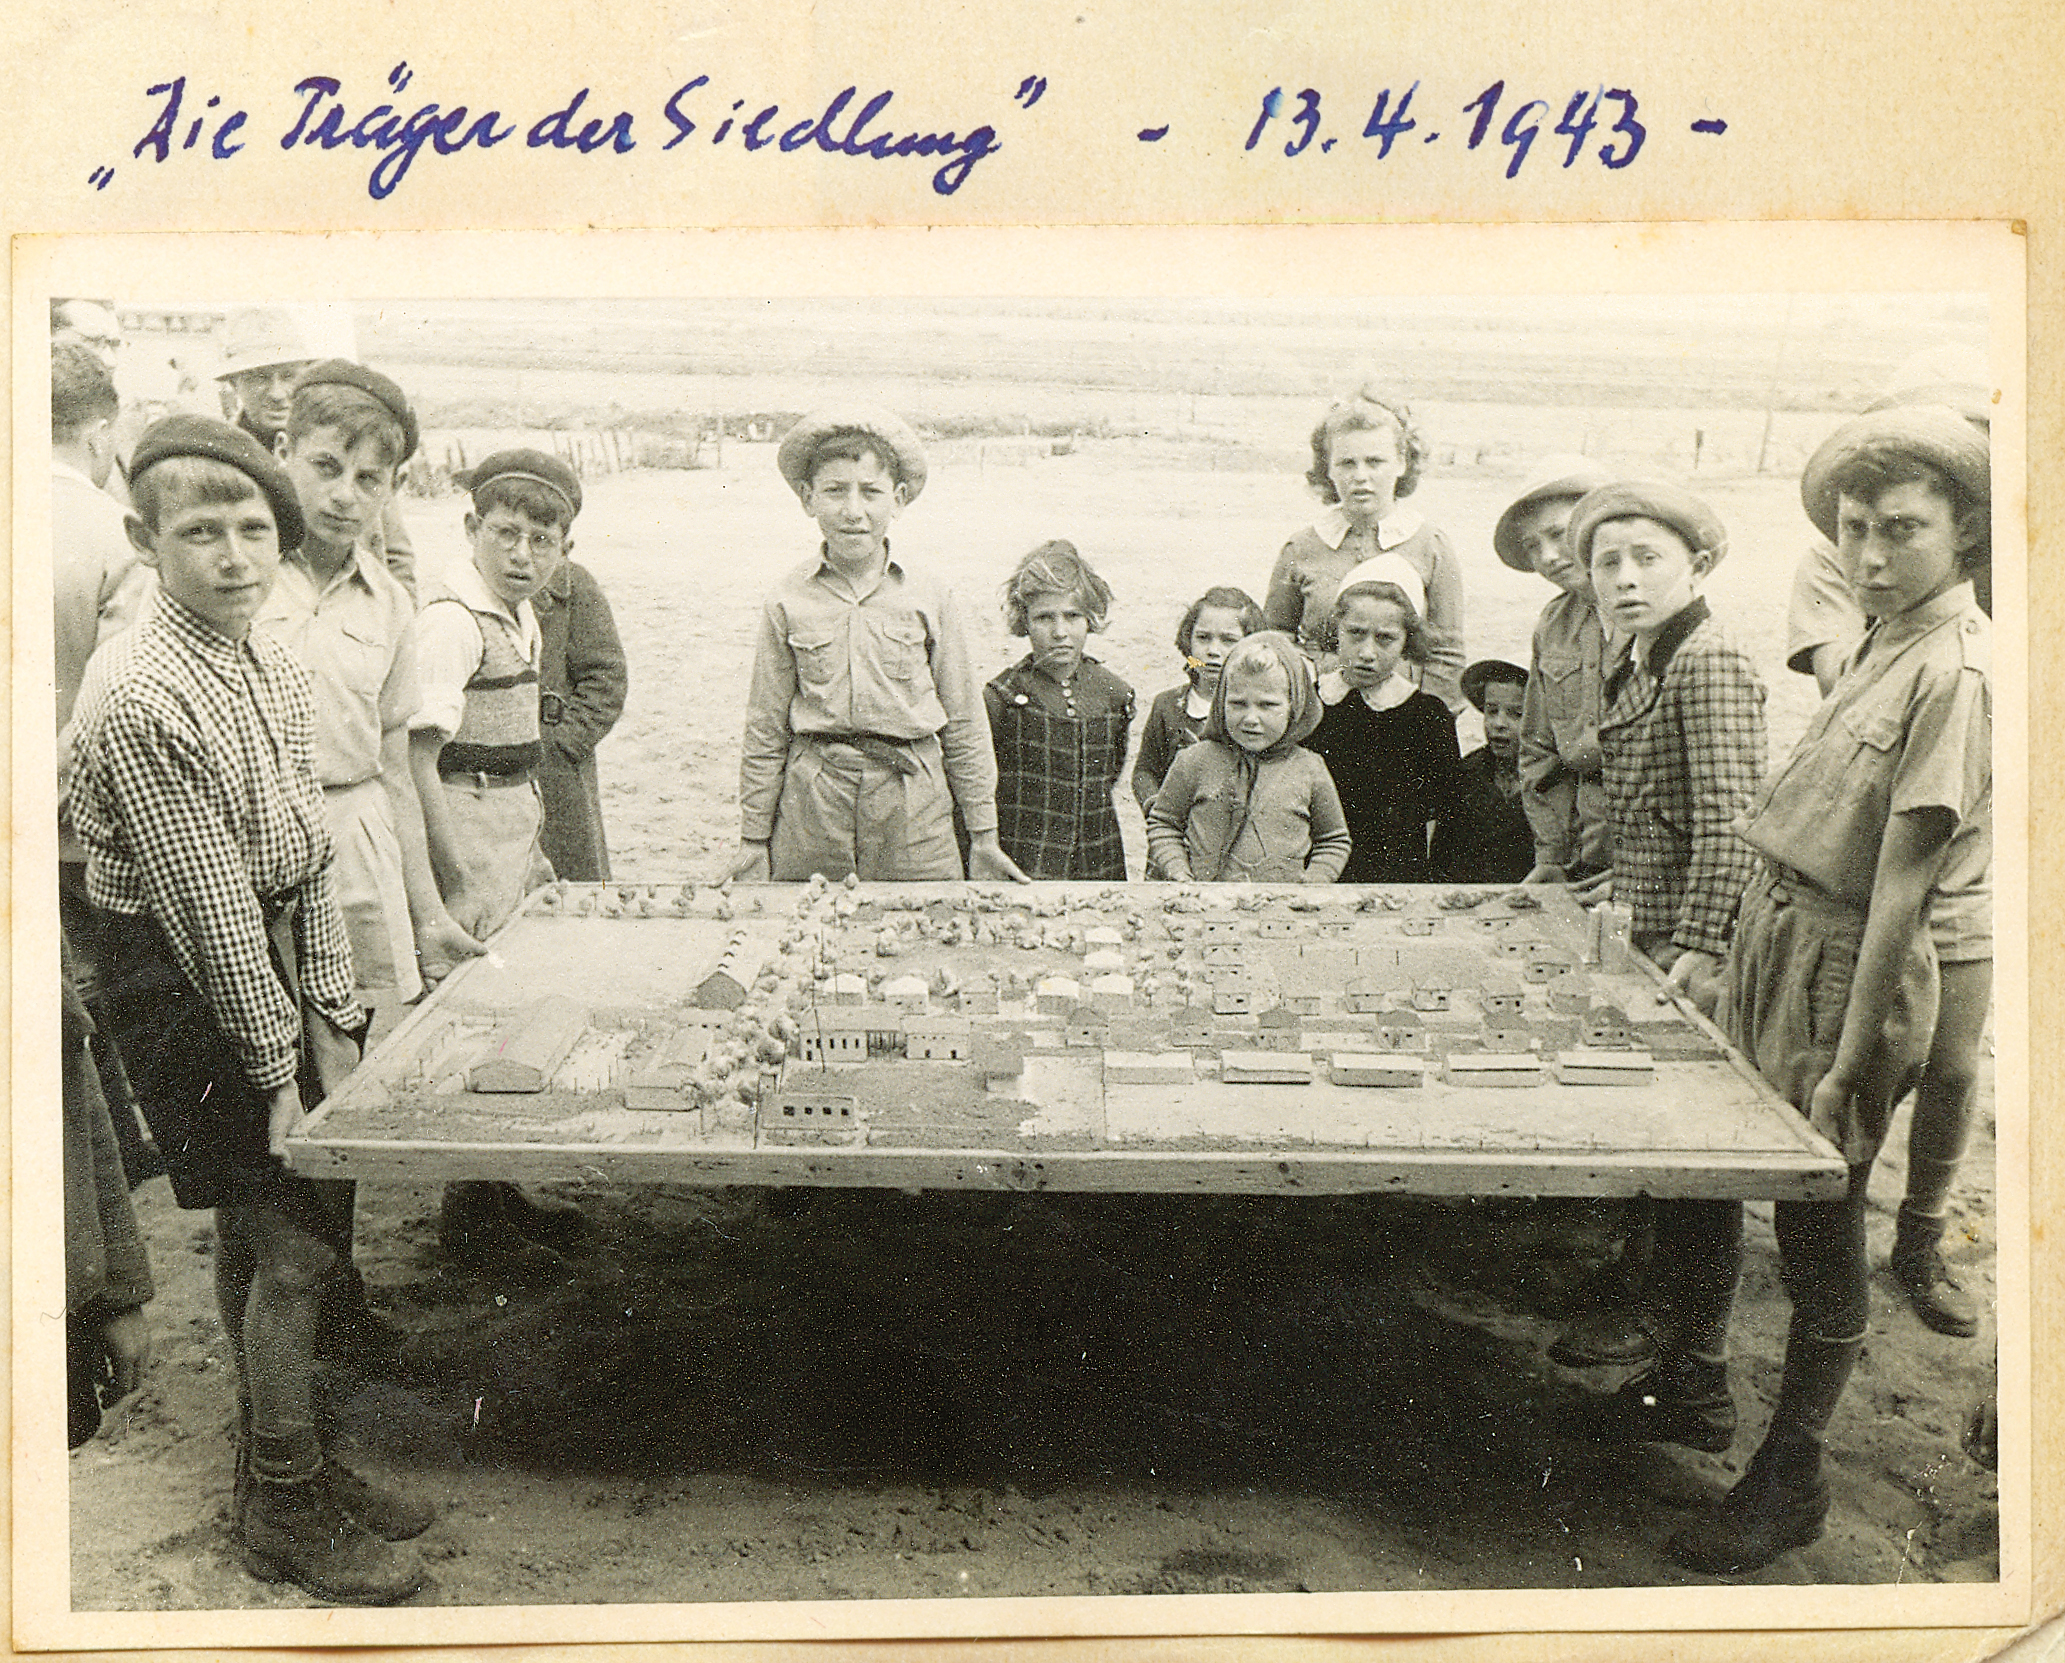 Hillel and his classmates with a model of Shavei Tzion, 1943.